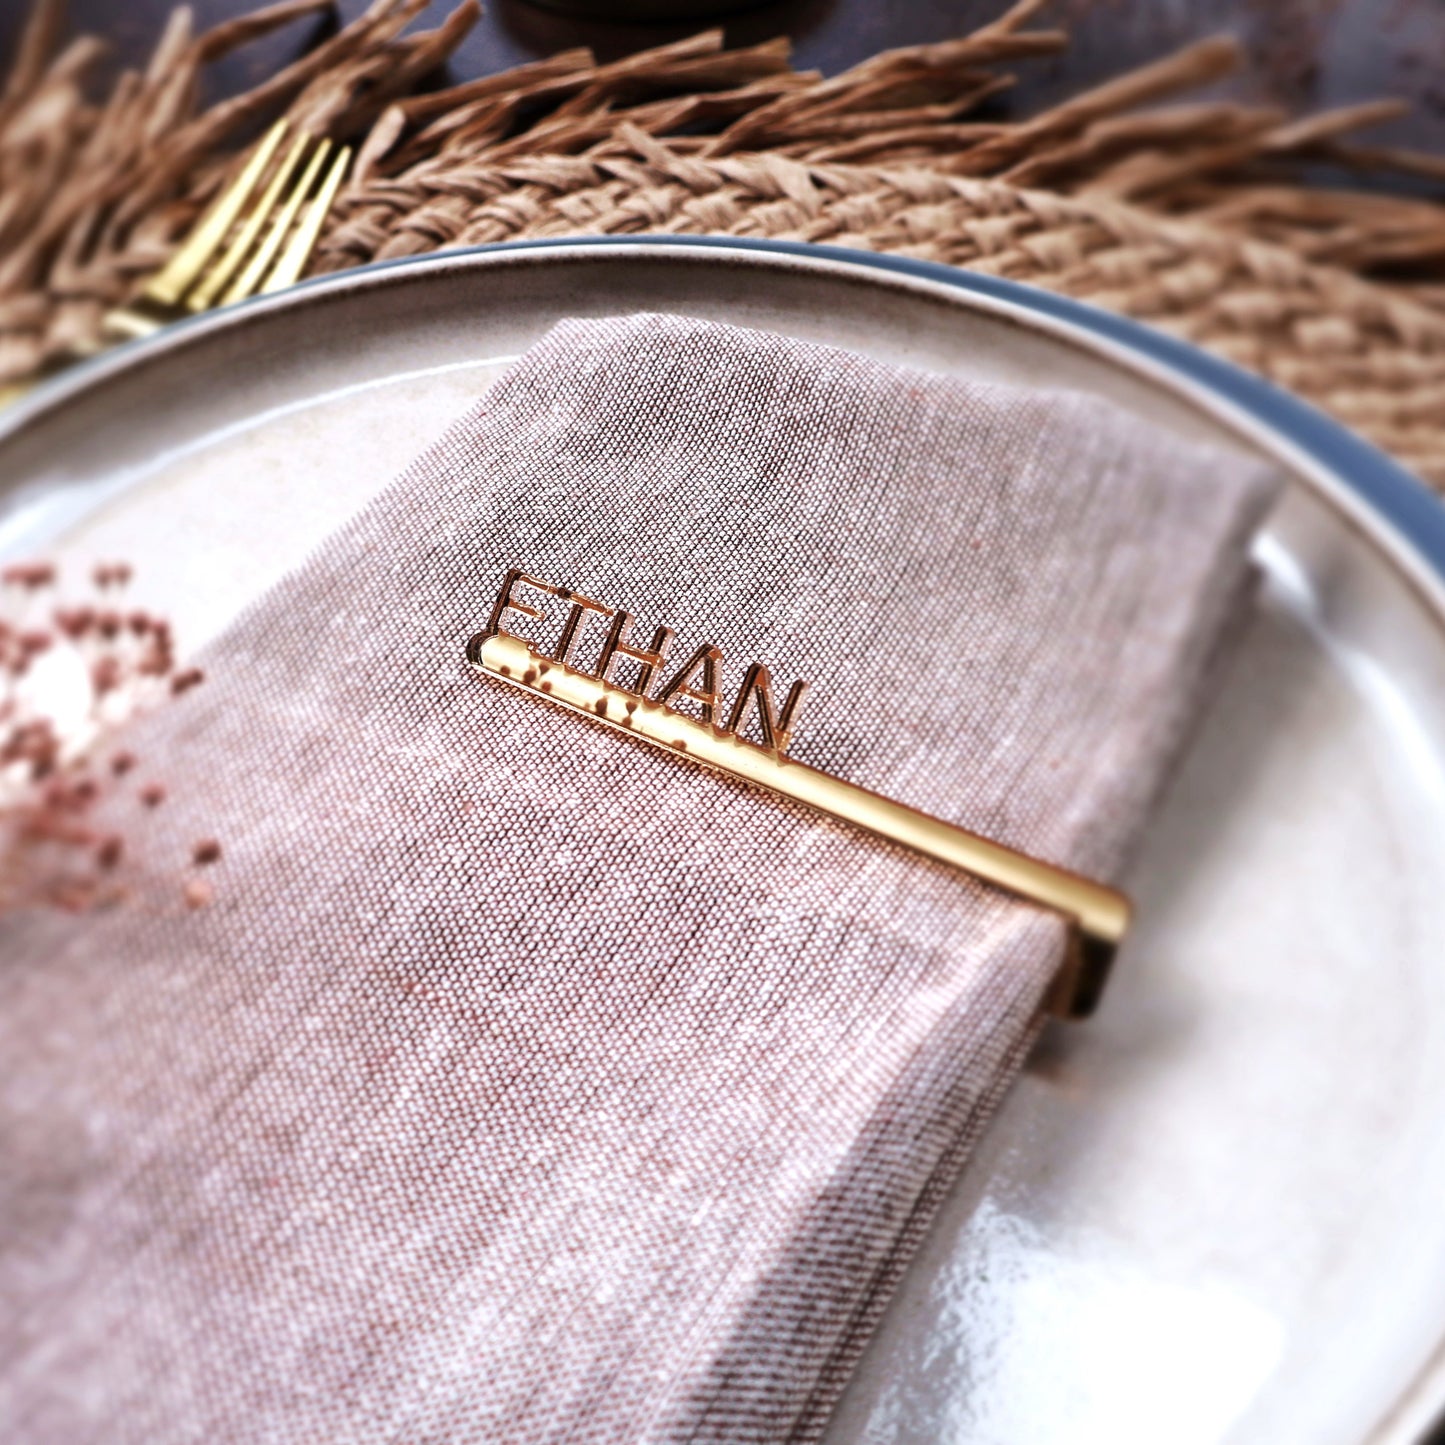 gold acrylic personalized napkin tags custom napkin rings wooden wedding name cards guest place card bachelorette dinner party name tag stationary place tag napkin rings custom napkin rings wood napkin ring holder name napkin rings wedding decoration